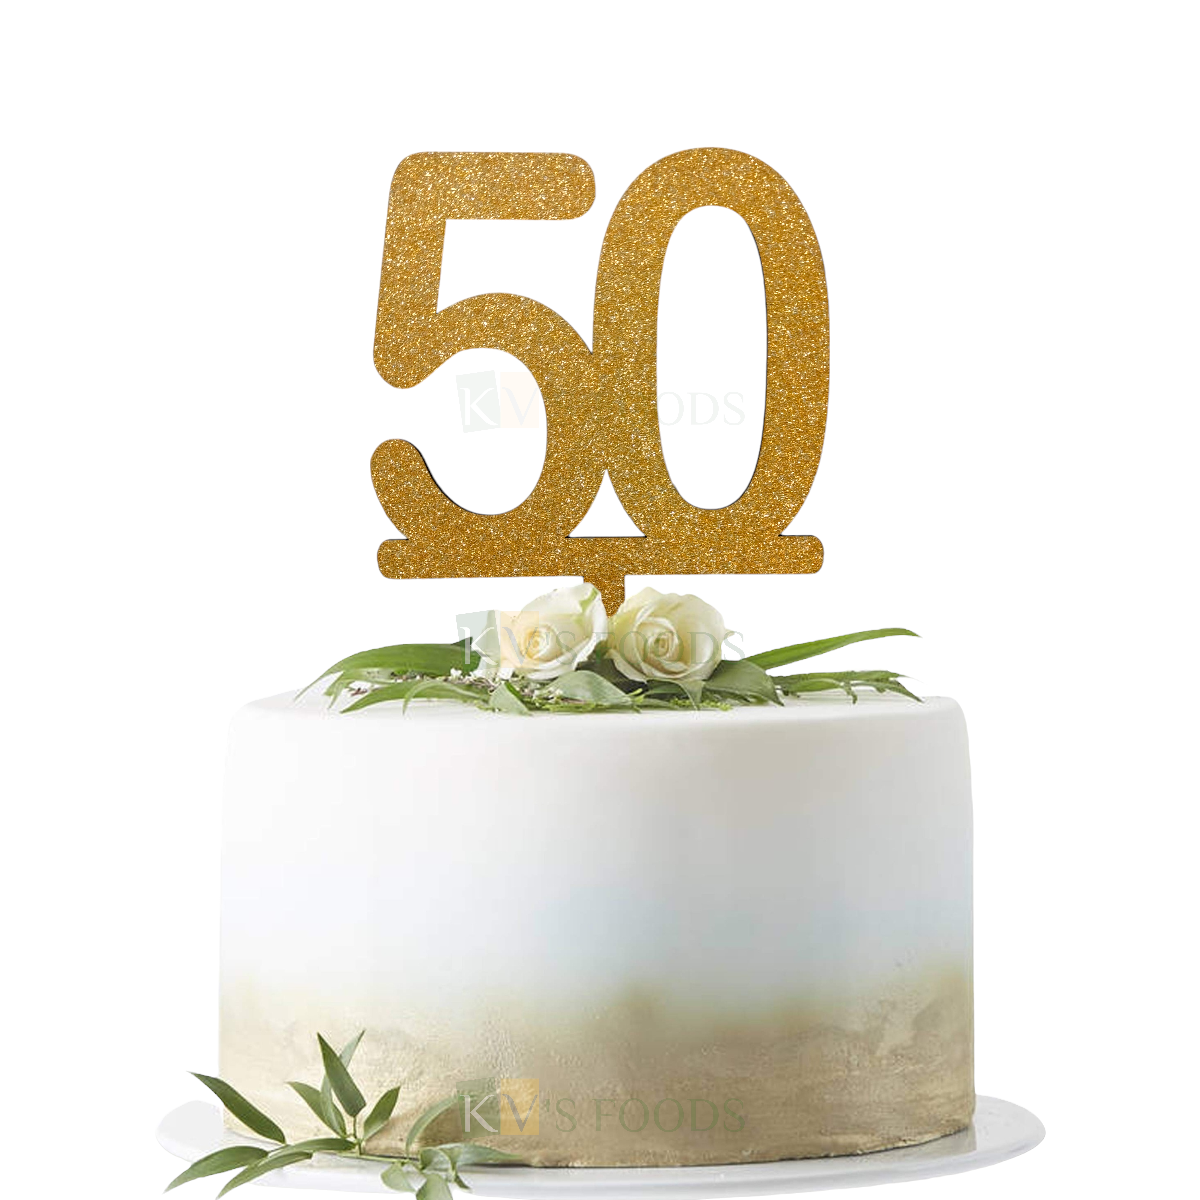 1PC Golden Shiny Glitter MDF 50 Number Cake Topper, Happy Birthday Theme, 50th Birthday Cake Topper, Fifty Number Theme Cake Glitter Insert 50 Years Old Birthday Party DIY Cake Decorations